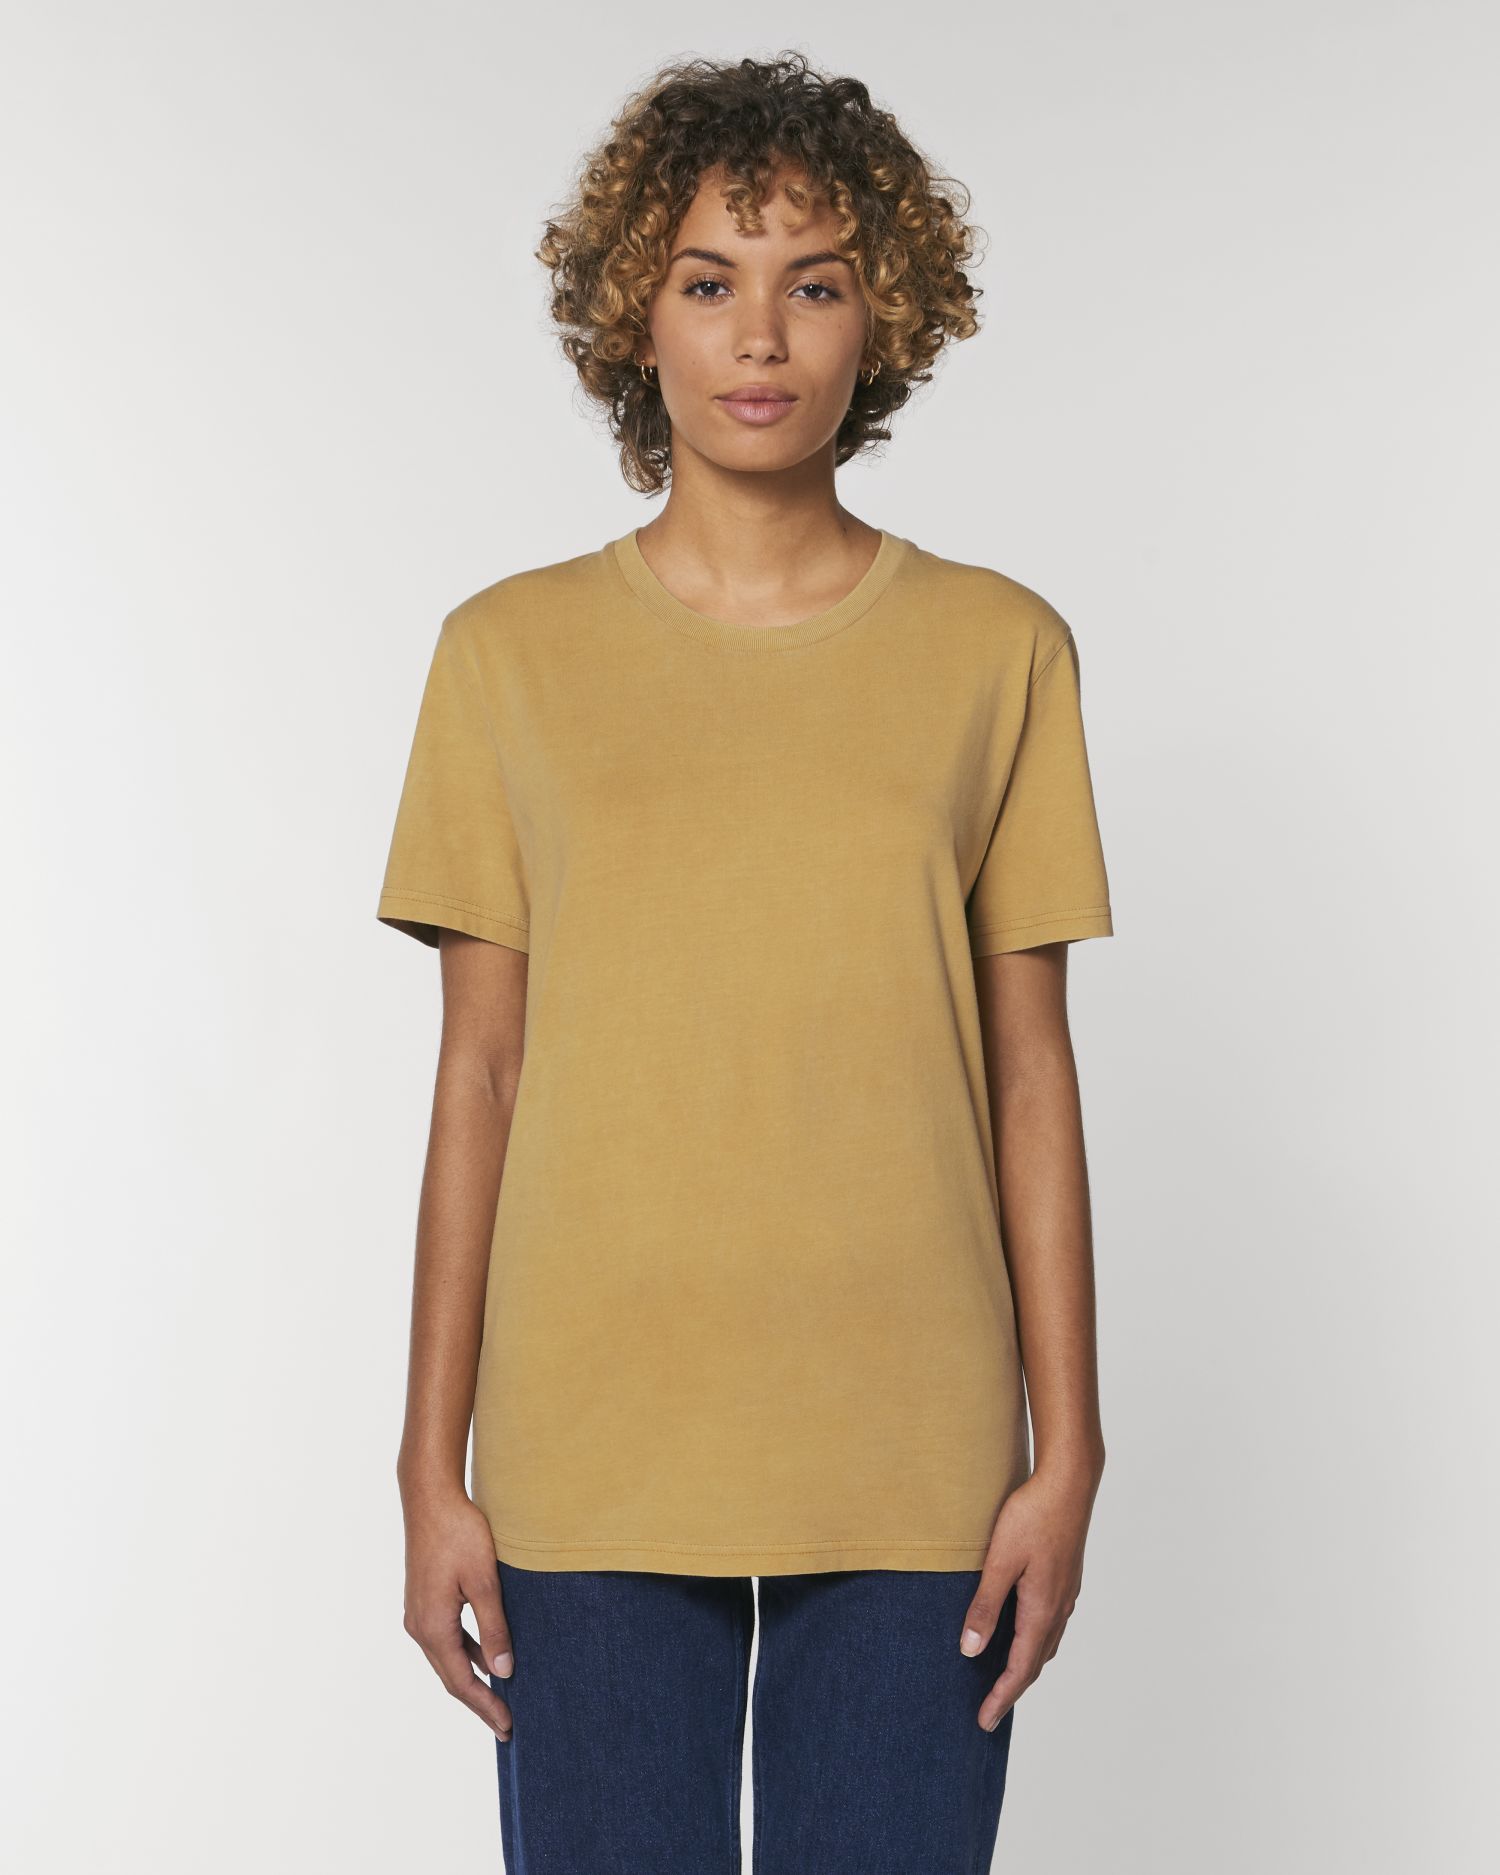 T-Shirt Creator Vintage in Farbe G. Dyed Ochre